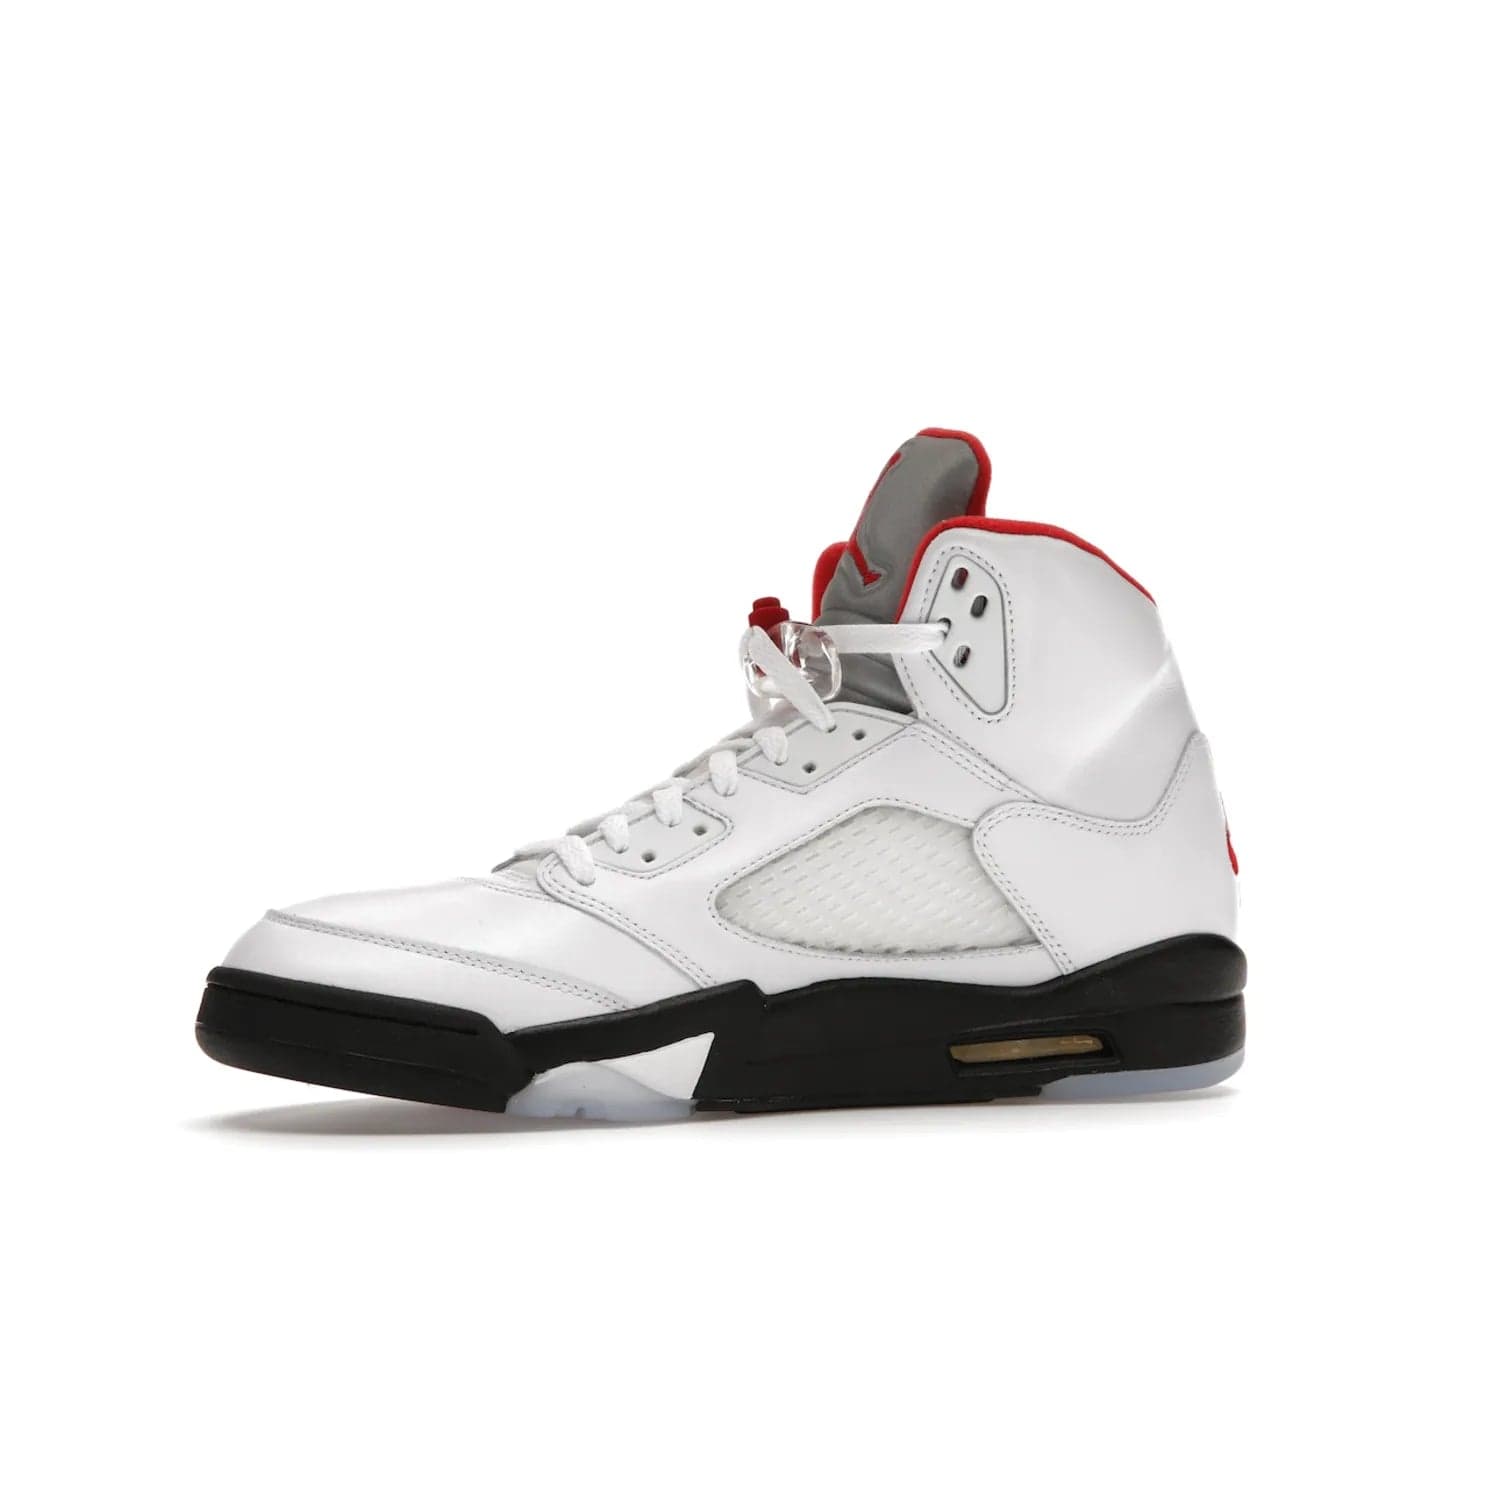 Jordan 5 Retro Fire Red Silver Tongue (2020) - Image 17 - Only at www.BallersClubKickz.com - Experience classic styling with the Jordan 5 Retro Fire Red Silver Tongue (2020). Features a white leather upper, 3M reflective tongue, midsole colorblocking, and an icy translucent outsole. Now available, upgrade your shoe collection today.